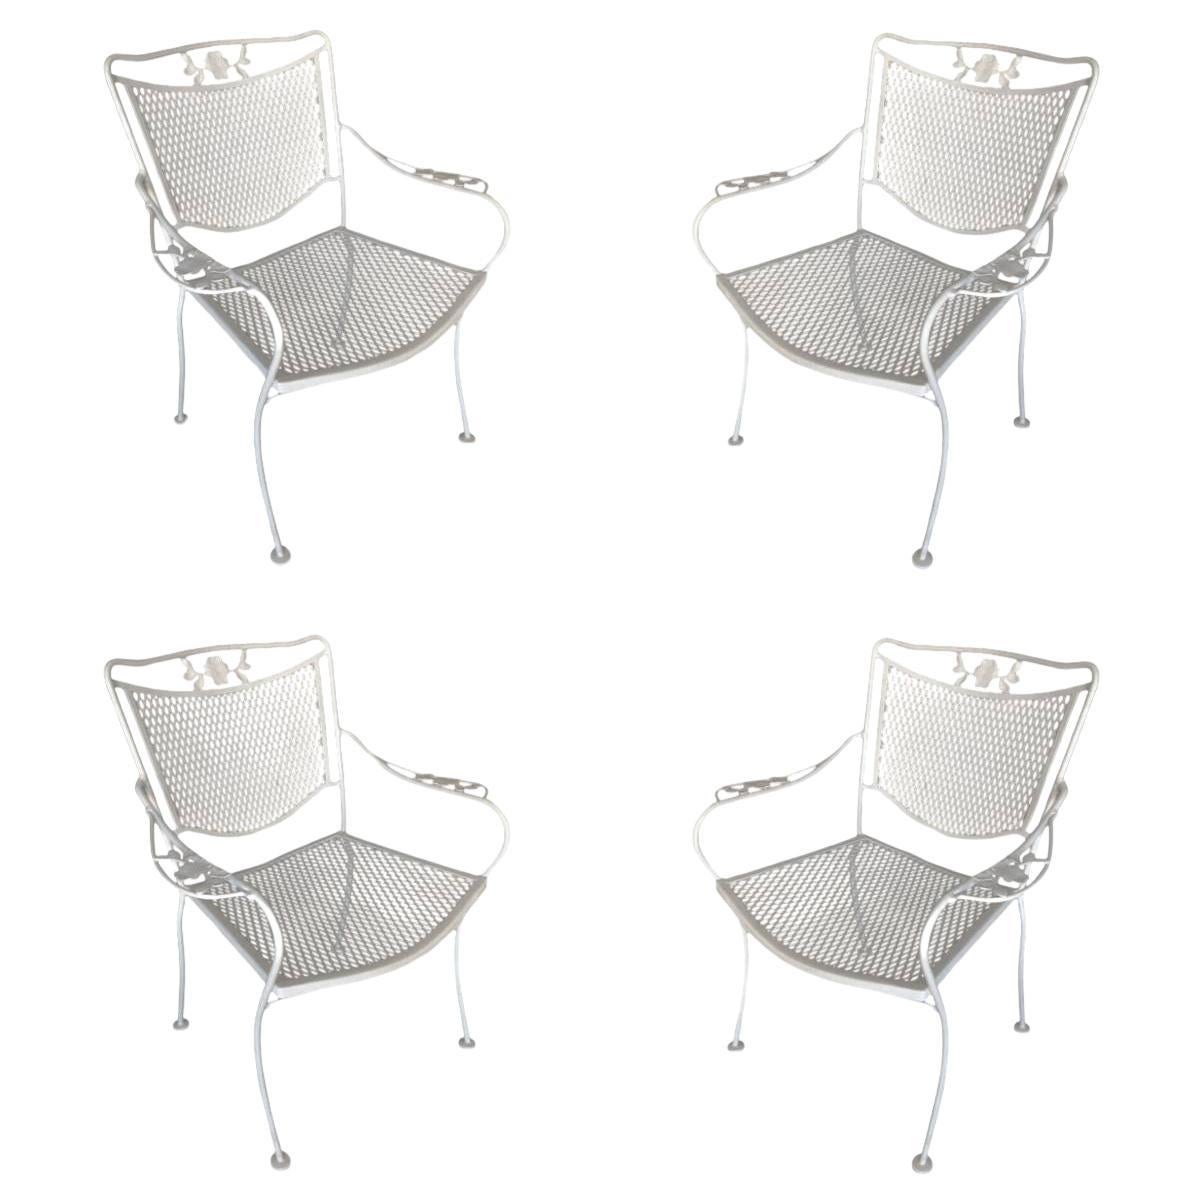 Woodard Company Mesh Outdoor Patio Lounge Chair with Leaf Pattern Arms